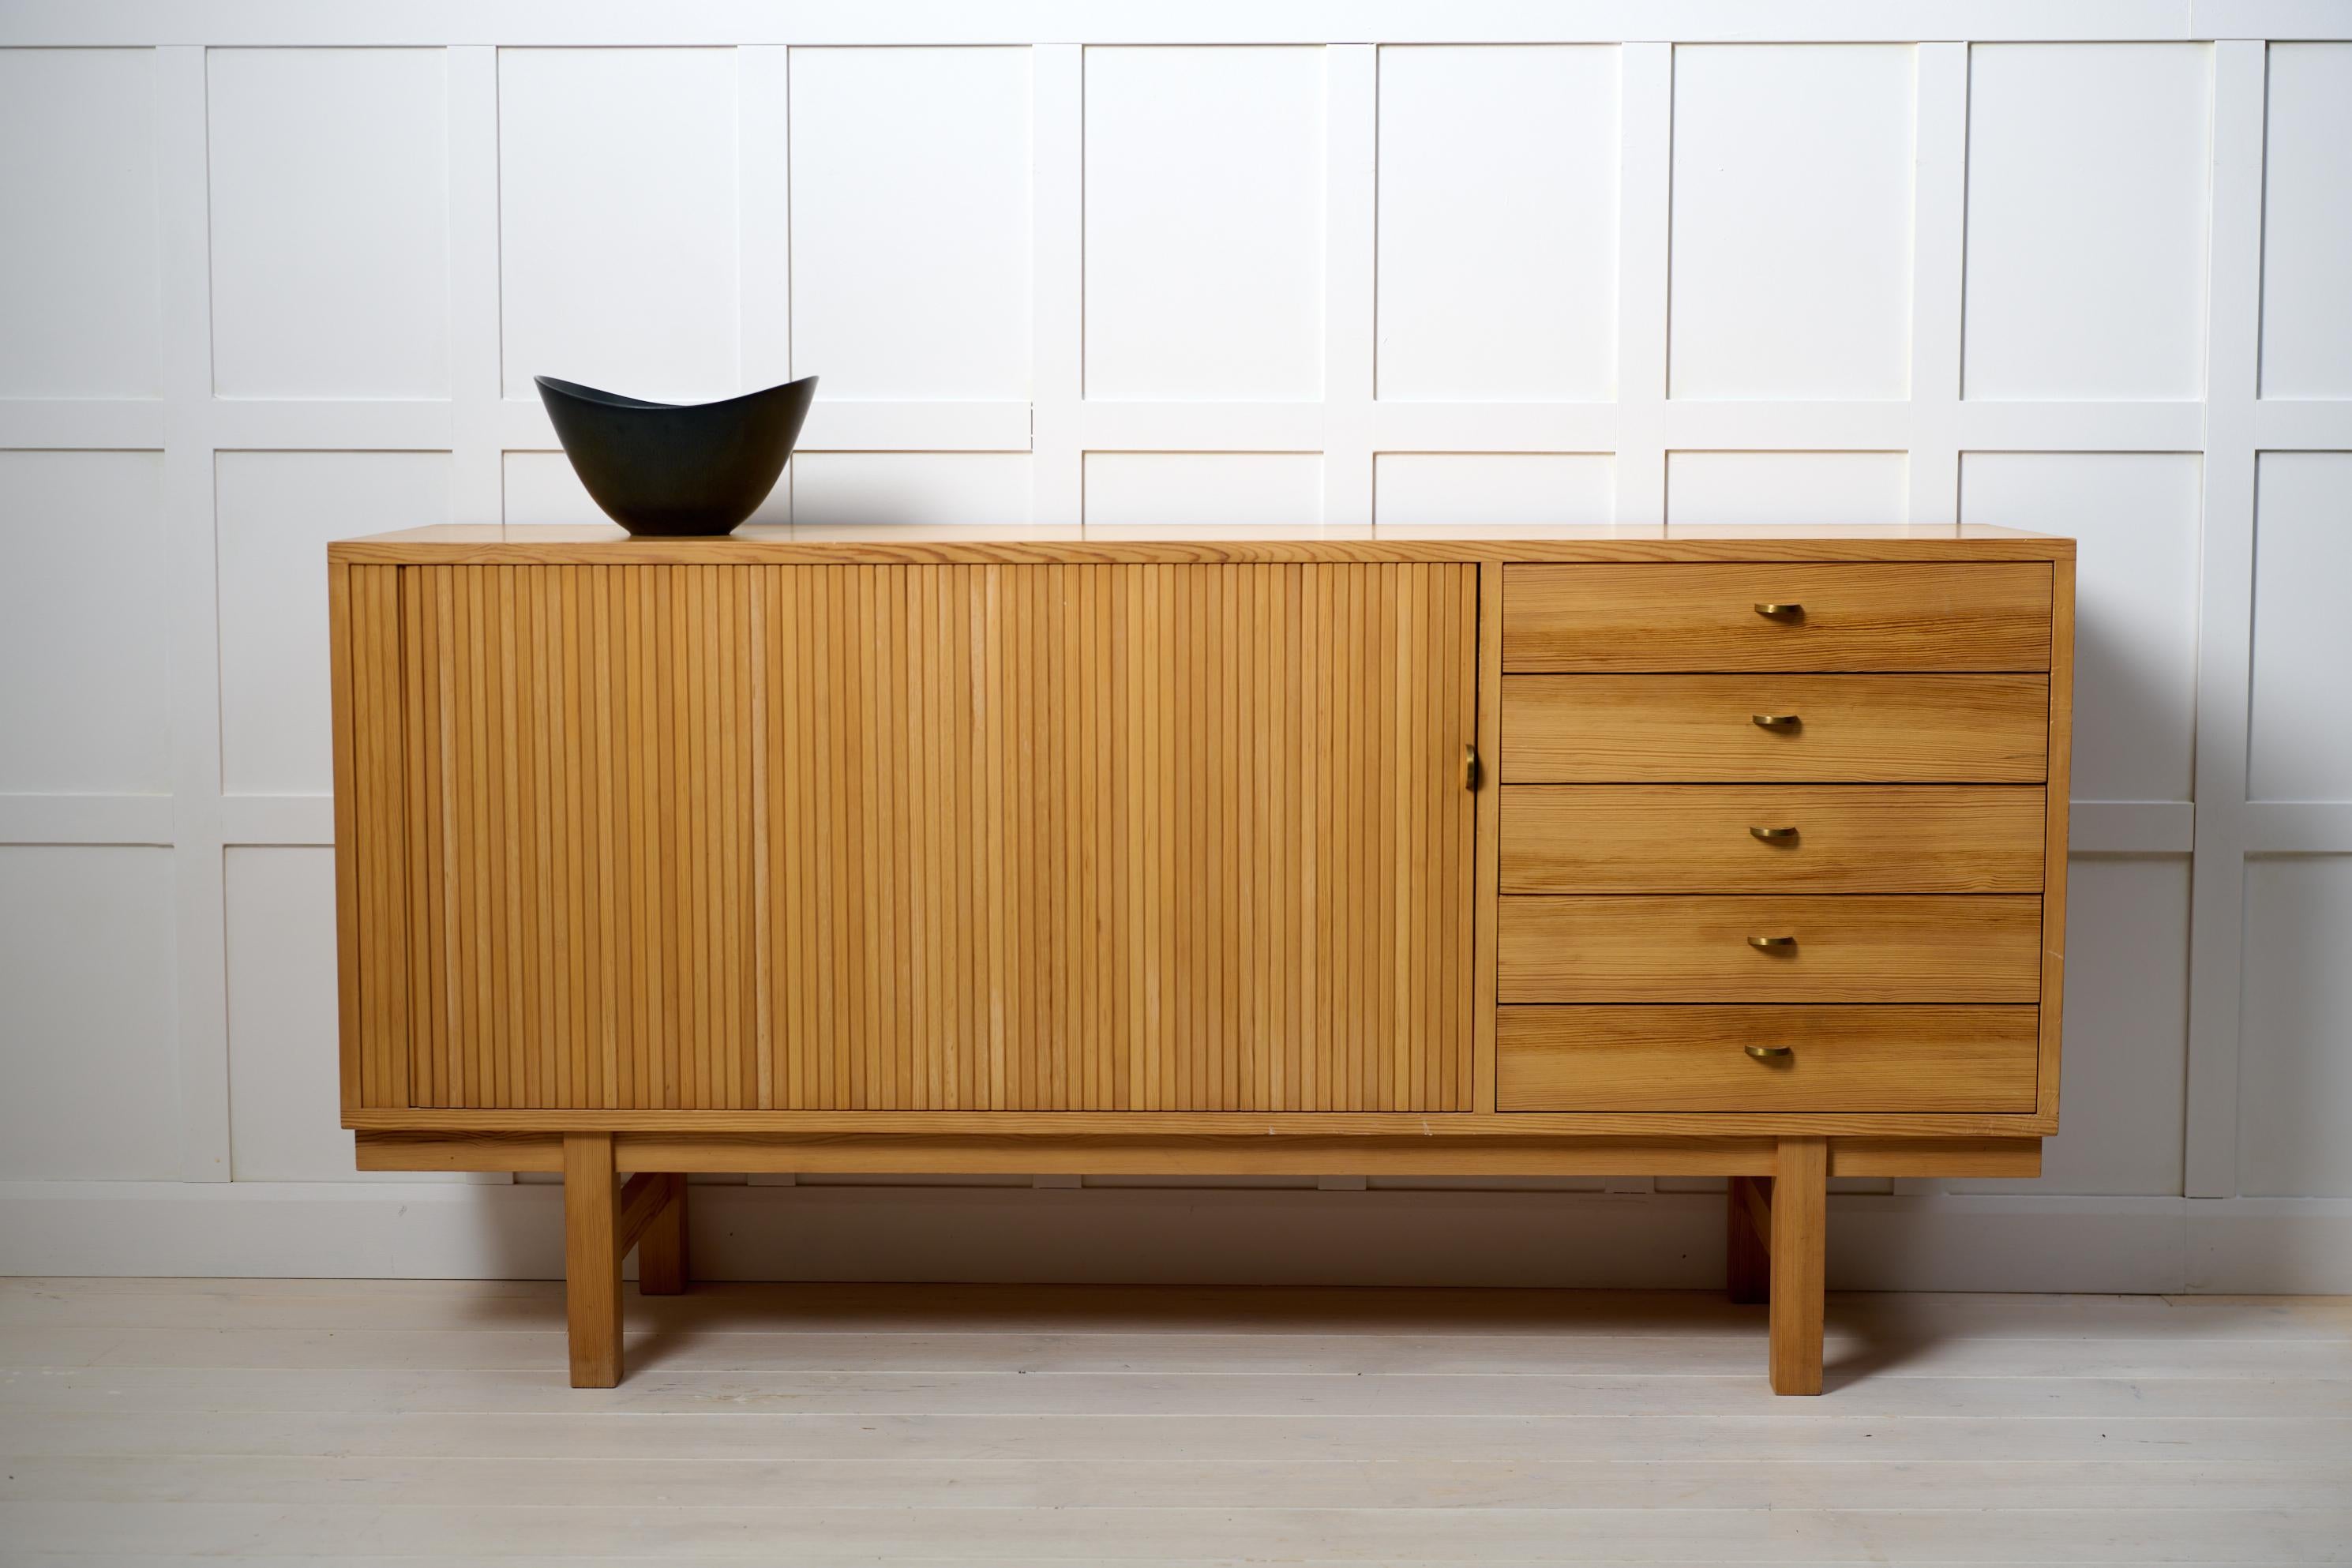 Swedish modern low sideboard from around 1960 to 1970. The sideboard is made in pine which is unusual to see. It has five drawers and a jalousie-door. Good vintage condition. The sideboard has some minor traces of use. The brass drawer pulls to the